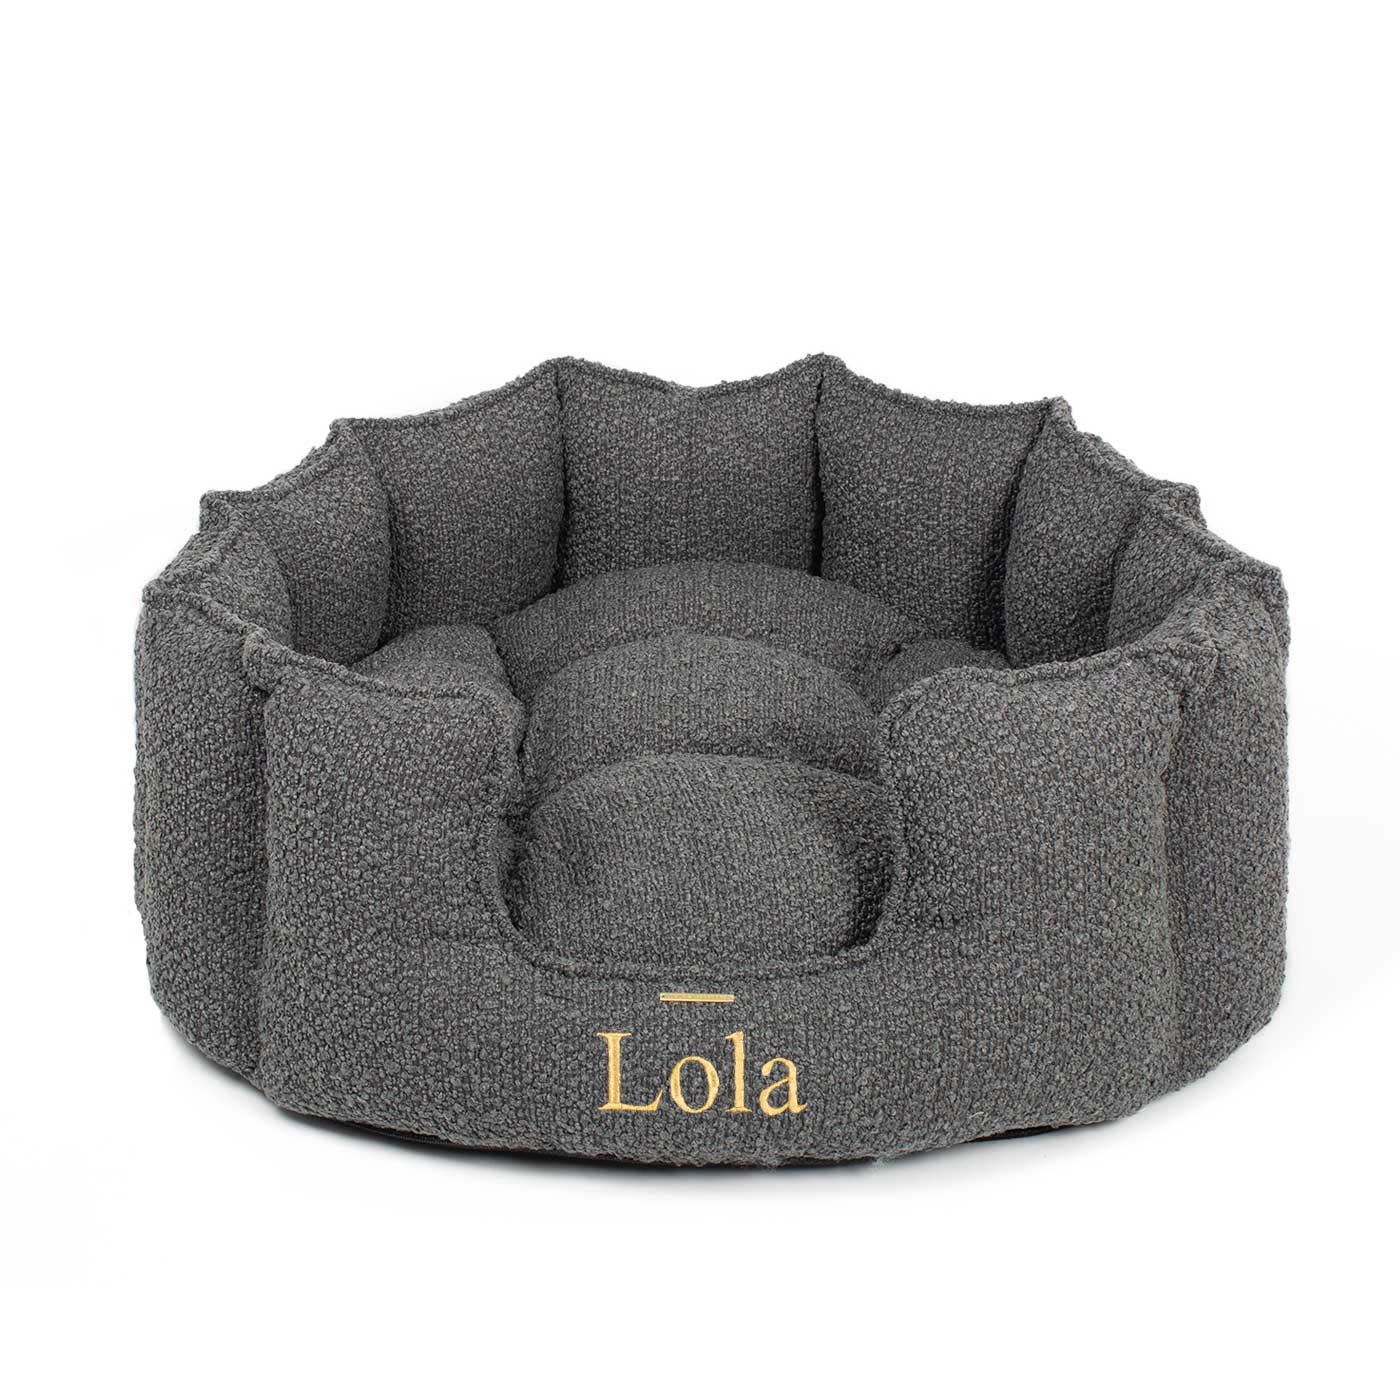 Discover Our Luxurious High Wall Bed For Cats & Kittens, Featuring inner pillow with plush teddy fleece on one side To Craft The Perfect Cat Bed In Stunning Granite Boucle! Available To Personalise Now at Lords & Labradors    